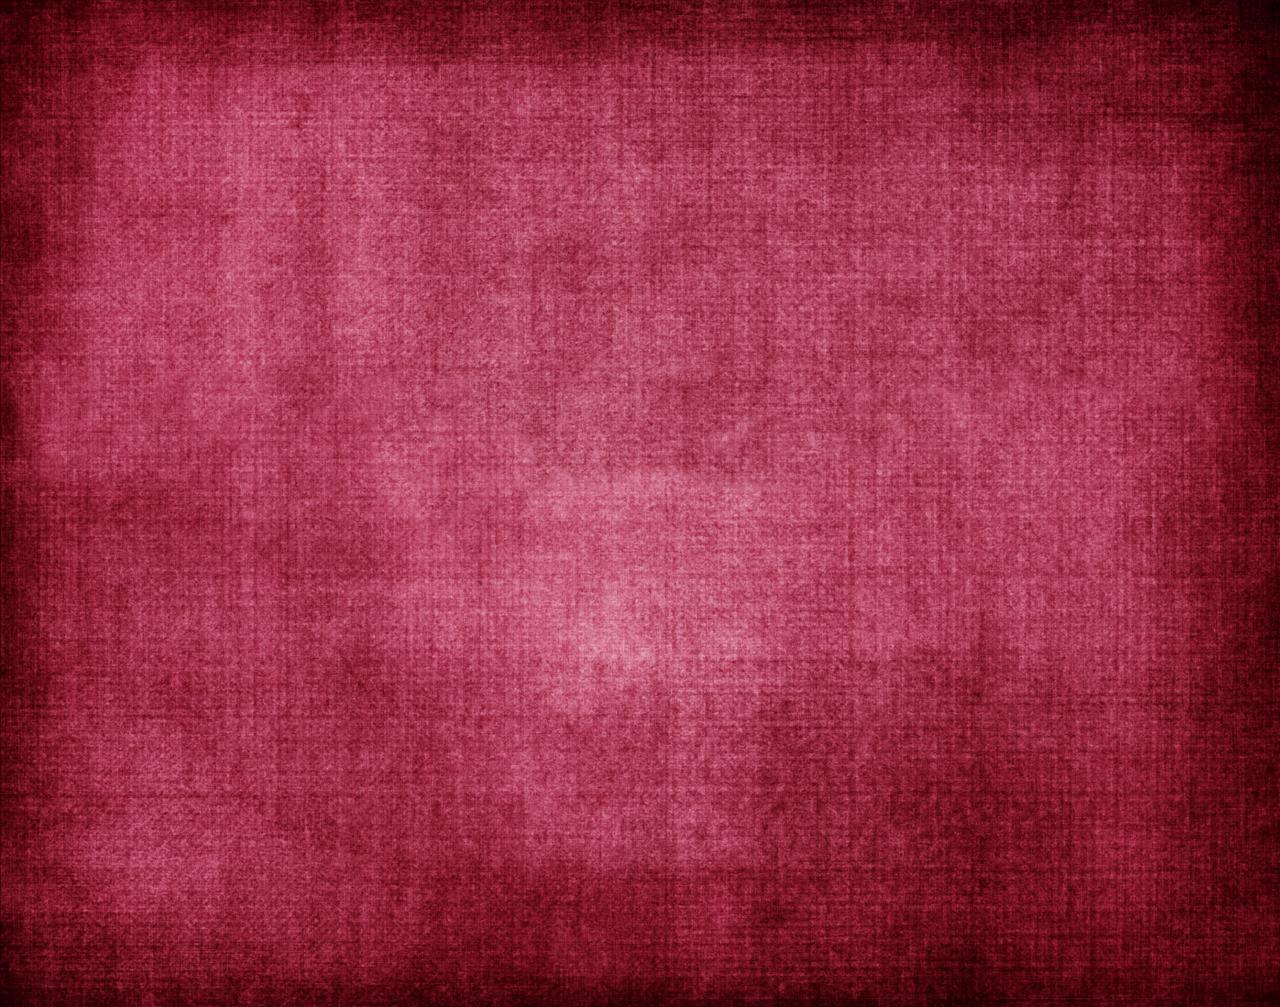 Passionate Burgundy PPT Backgrounds